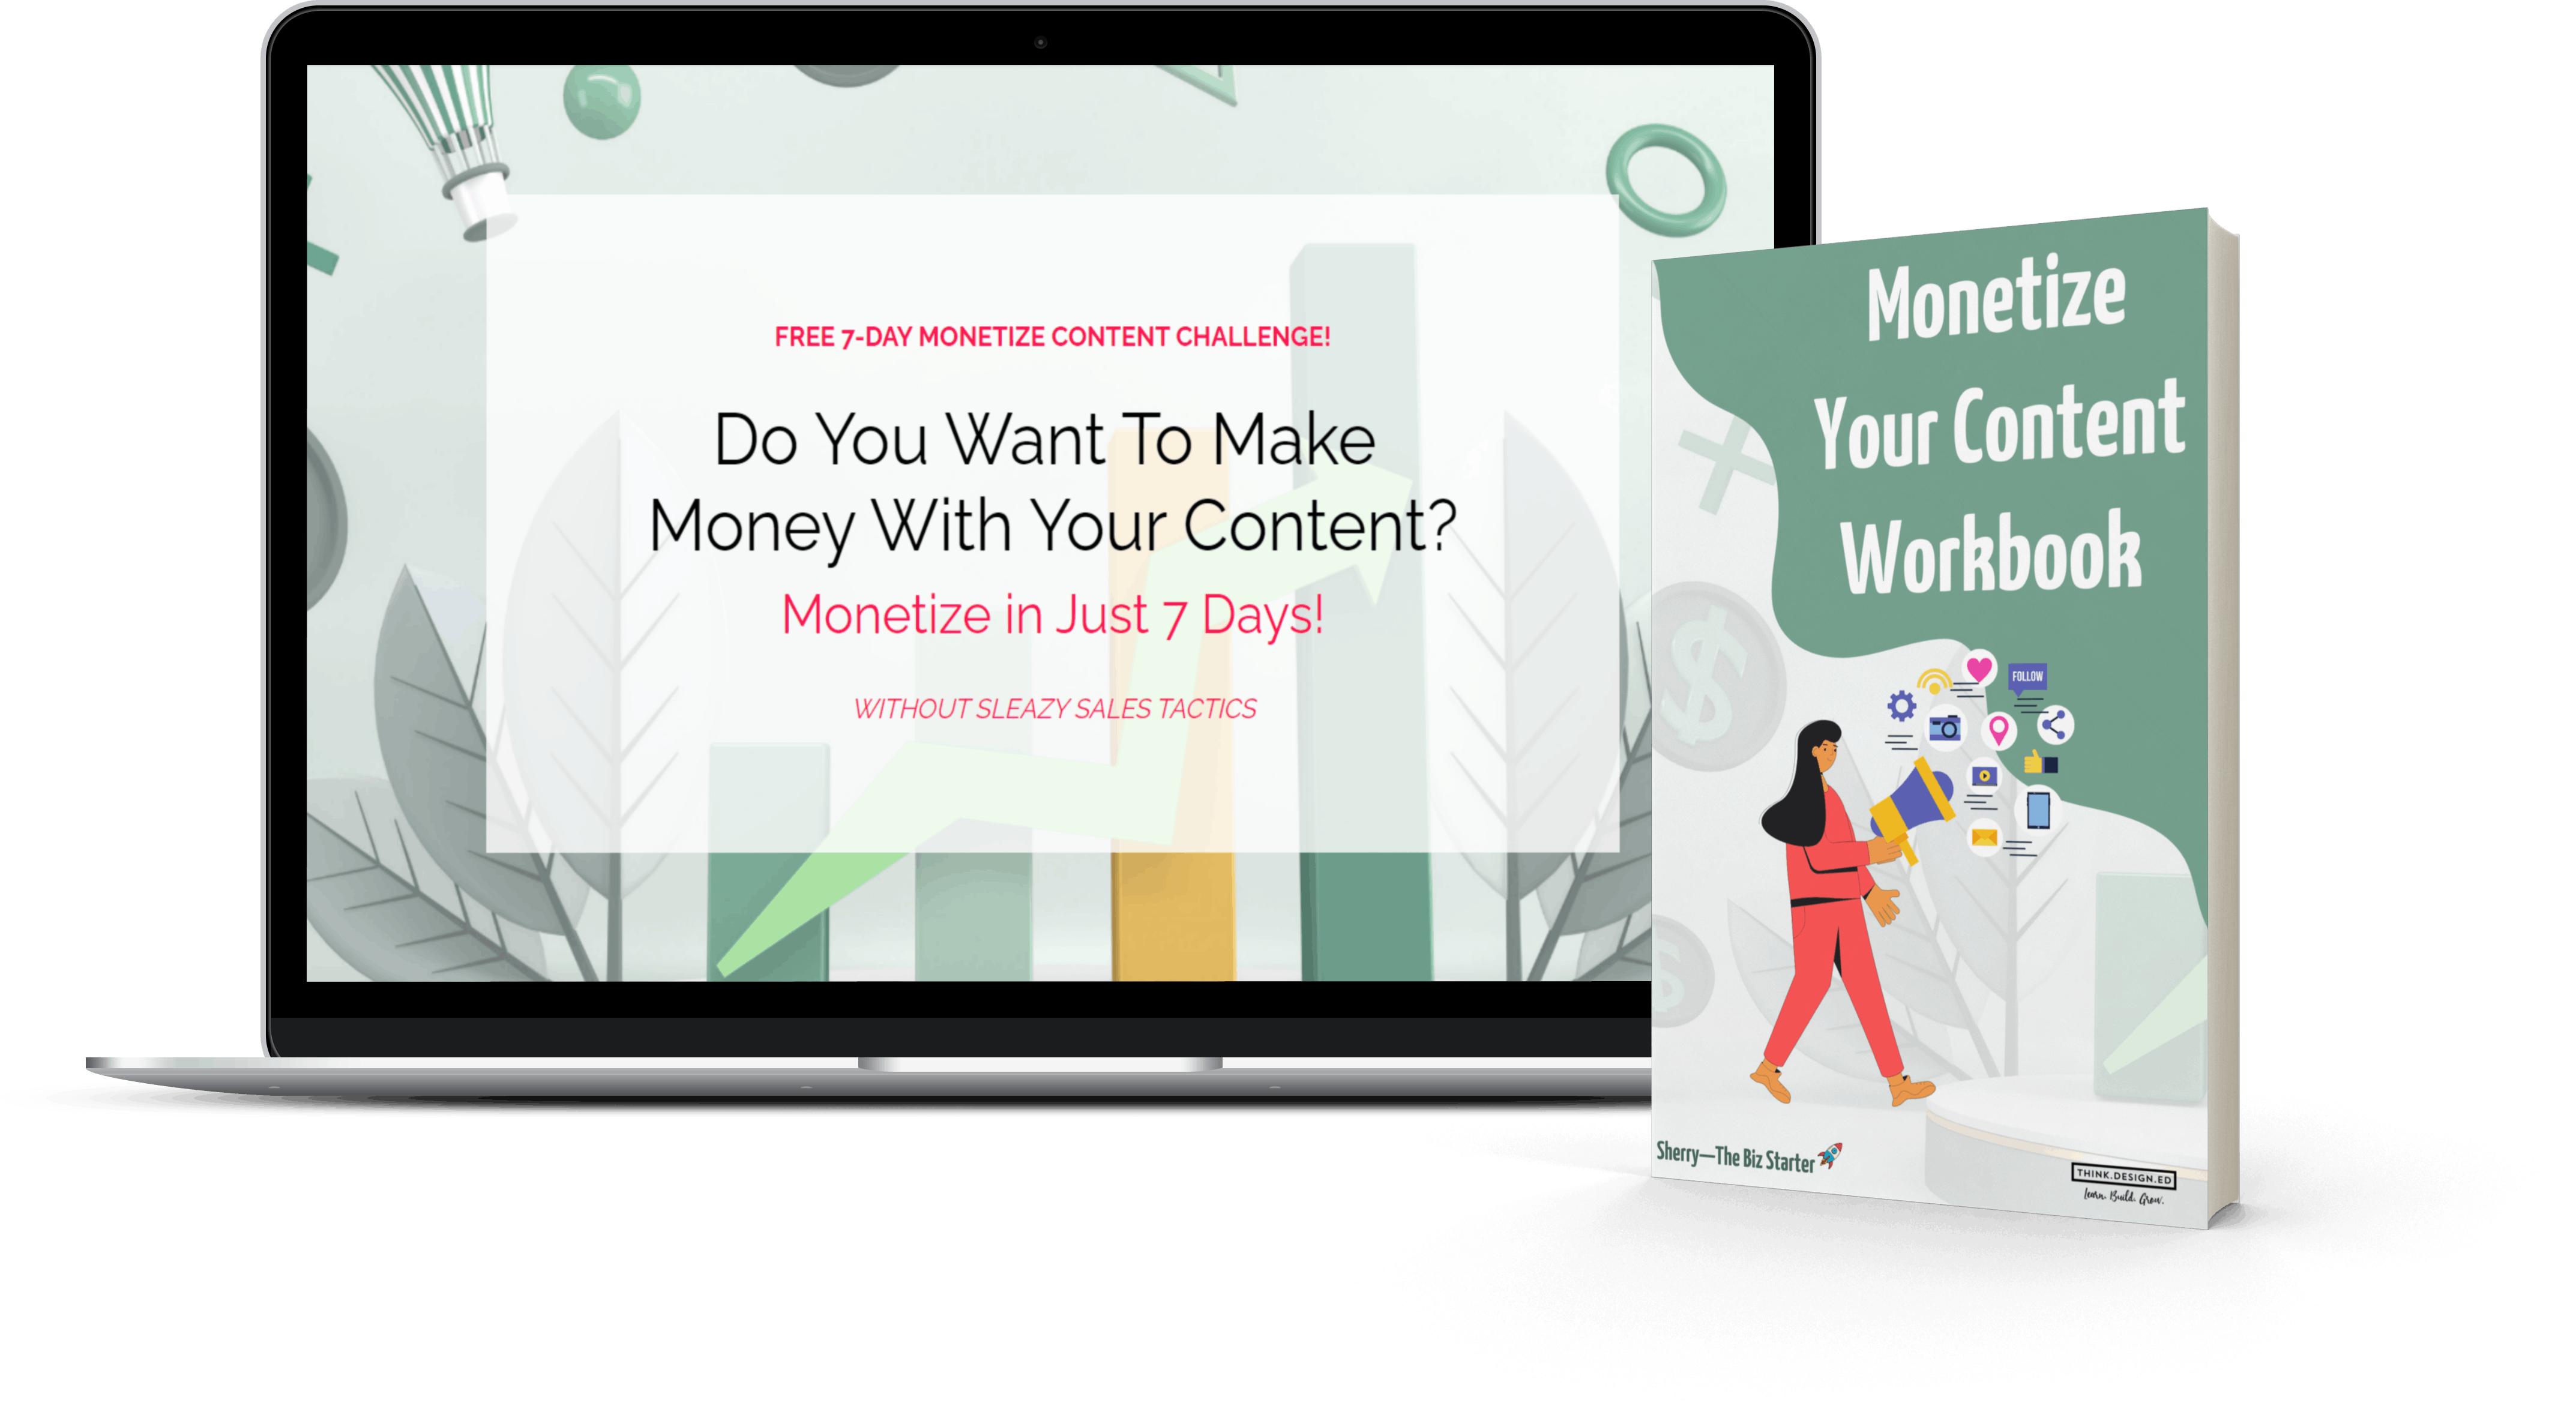 How to Monetize Your Content eCourse & Workbook